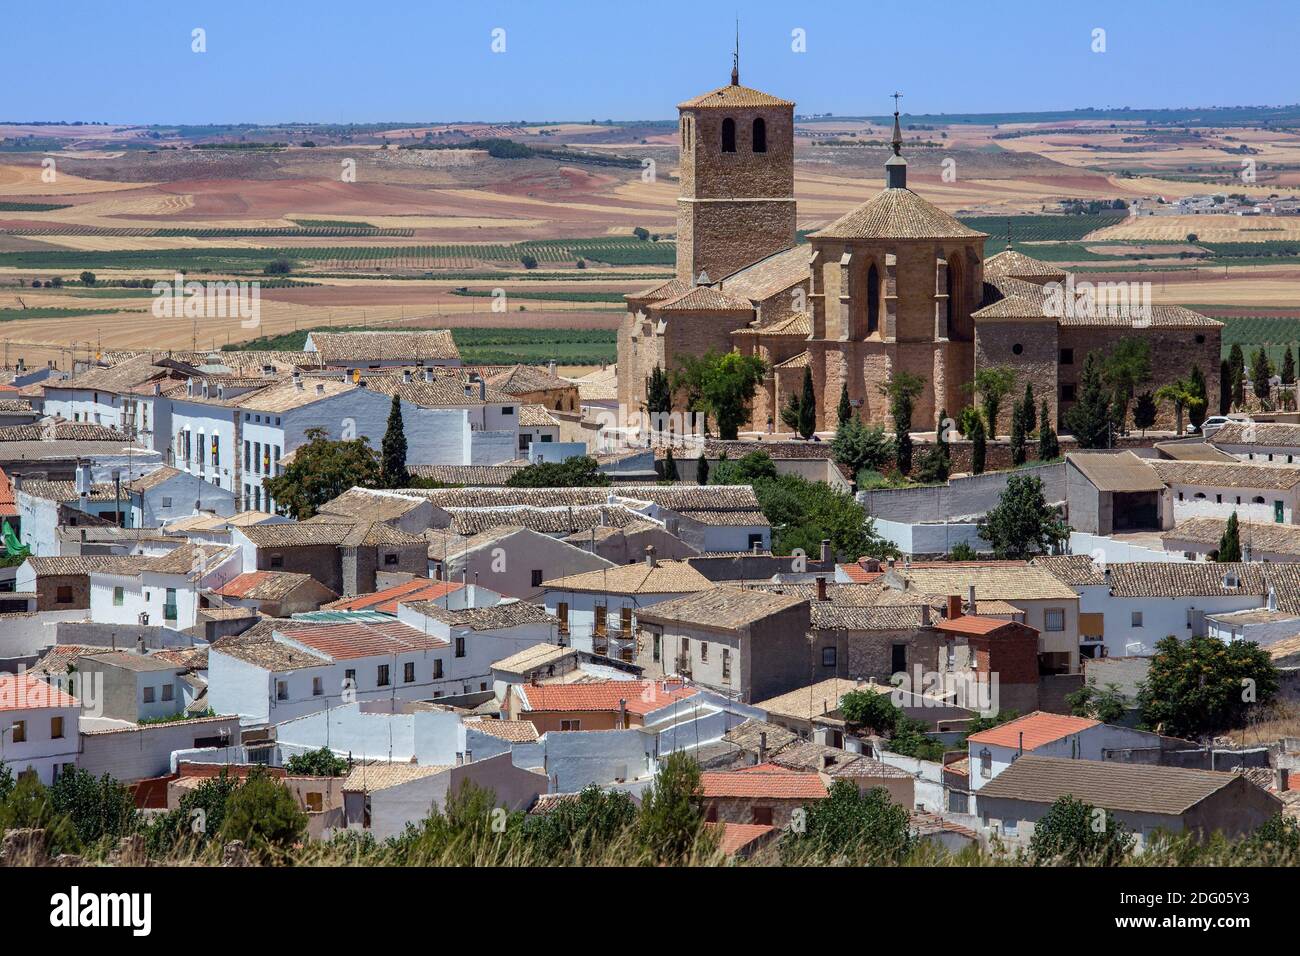 The town of Belmonte, located in the province of Cuenca, Castile-La Mancha, Spain. Stock Photo